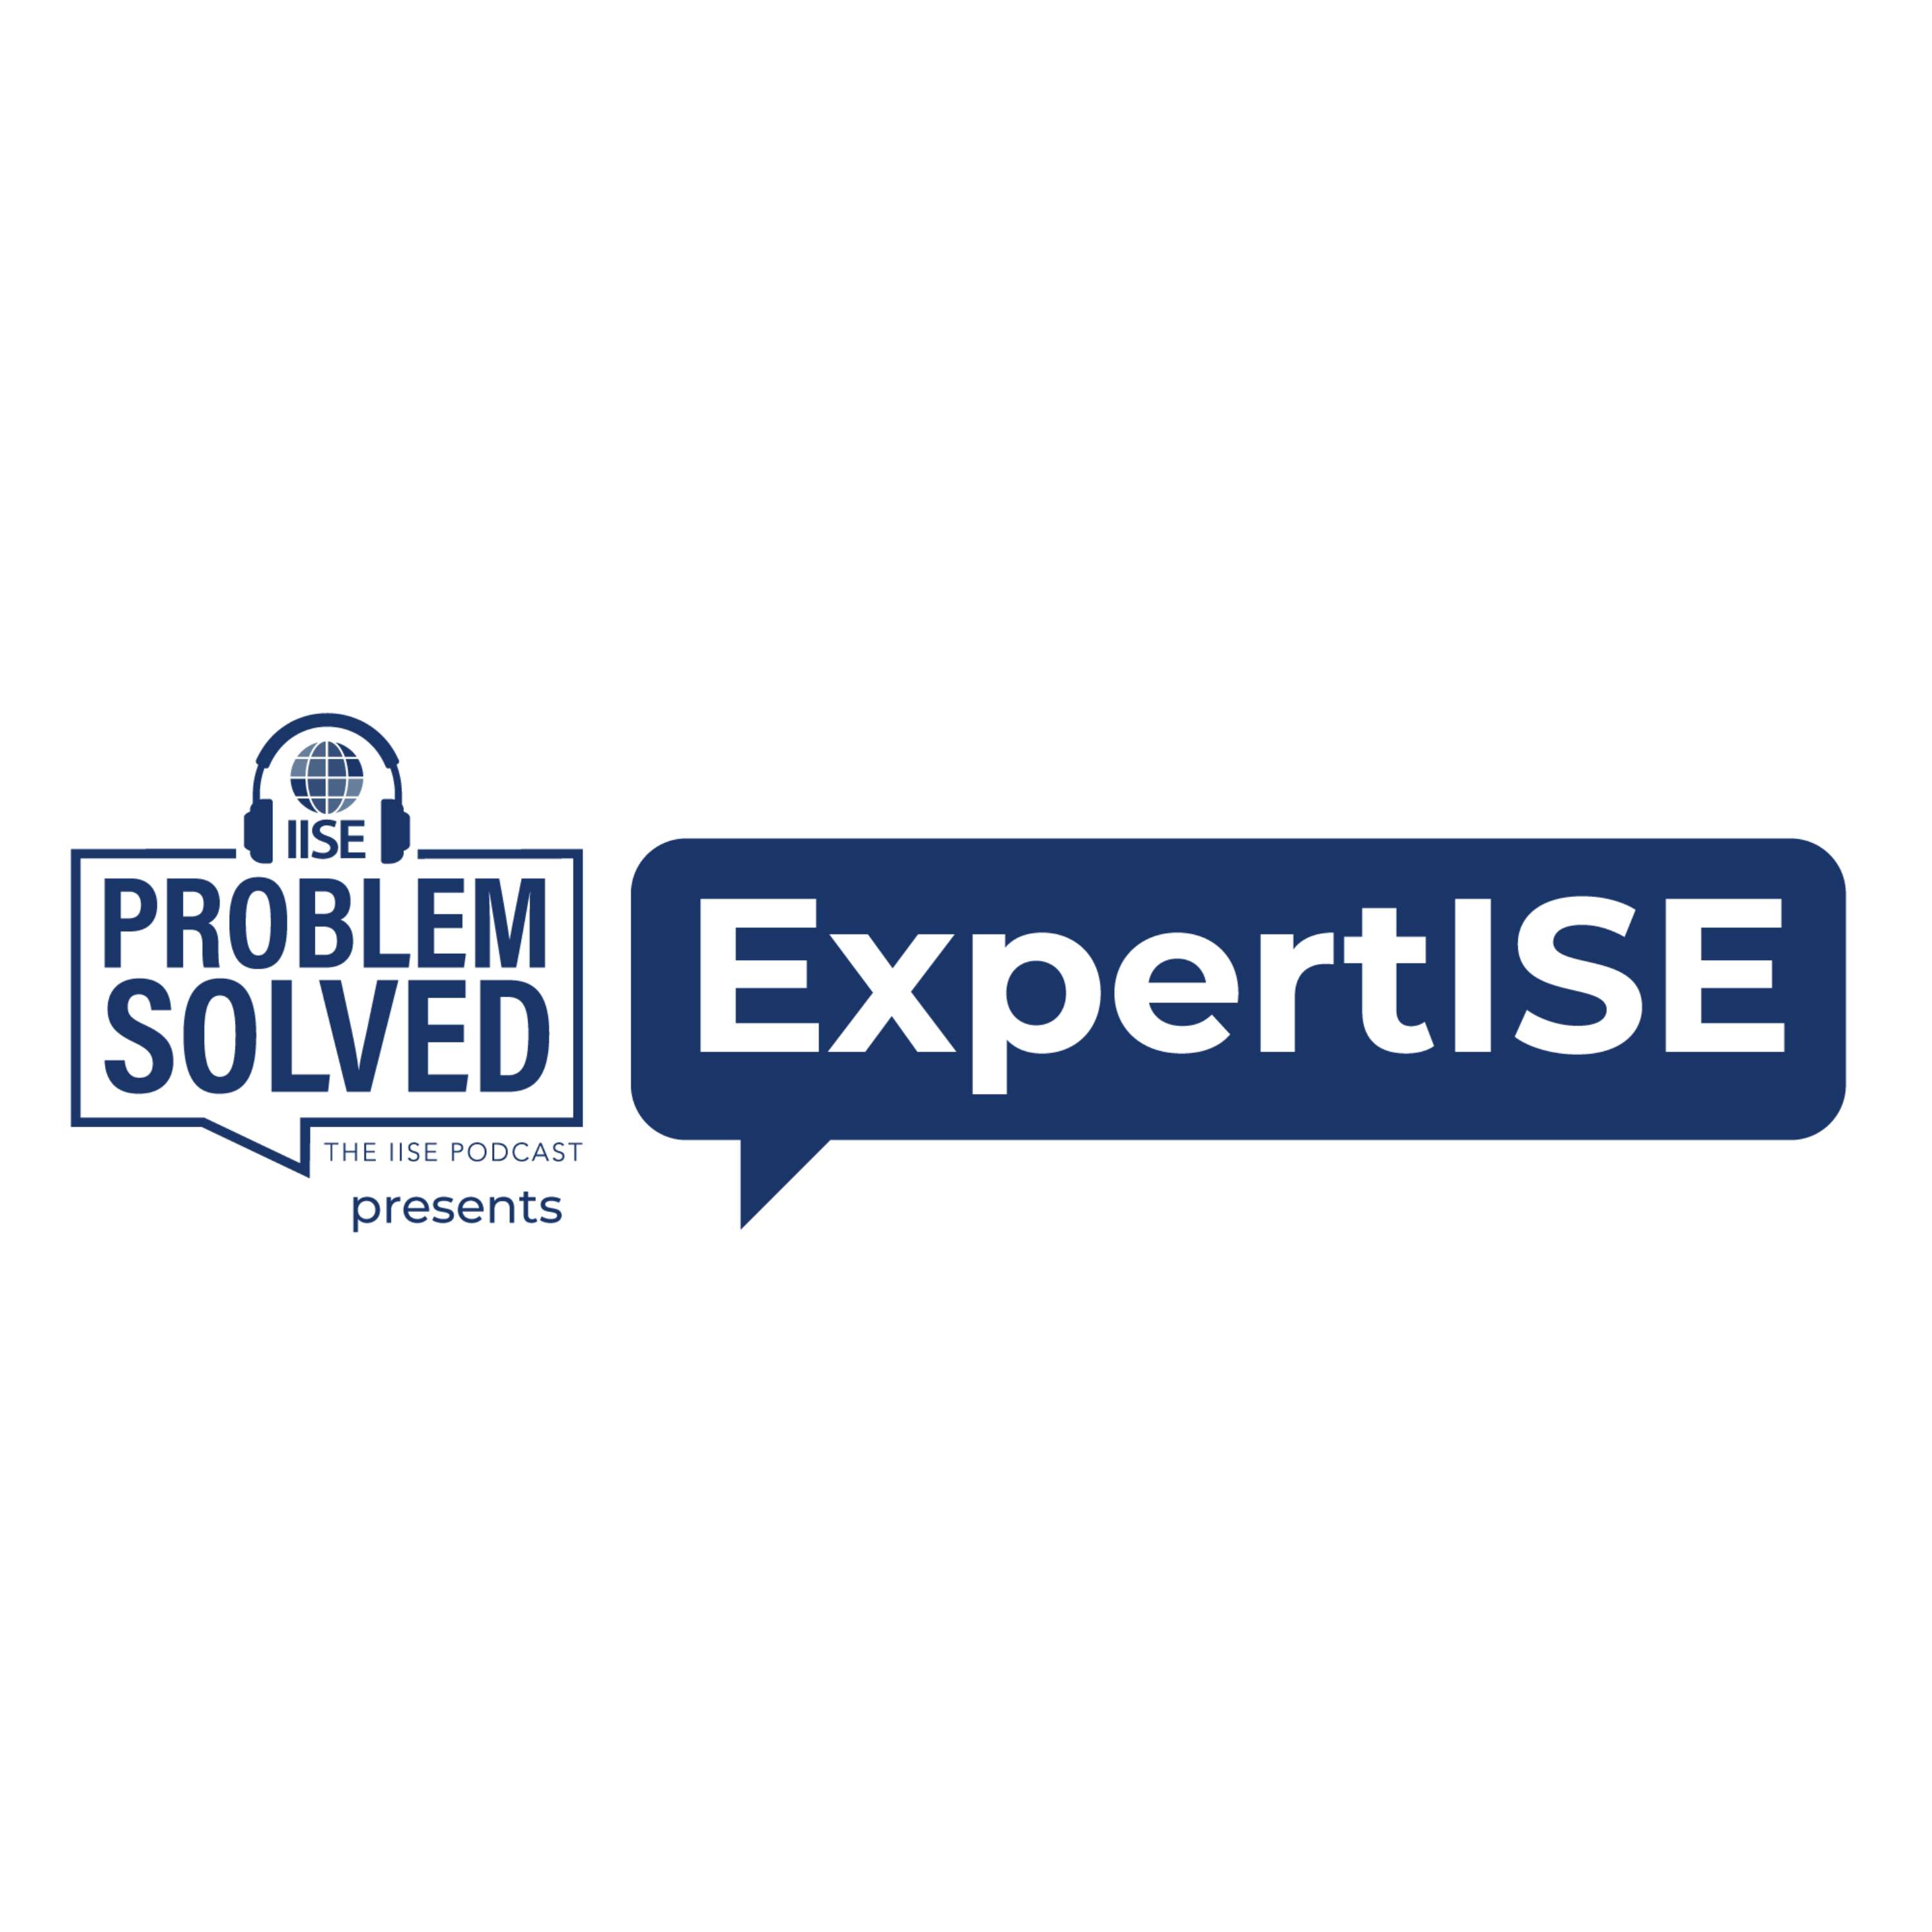 ExpertISE: Misconceptions or pitfalls in the ISE field